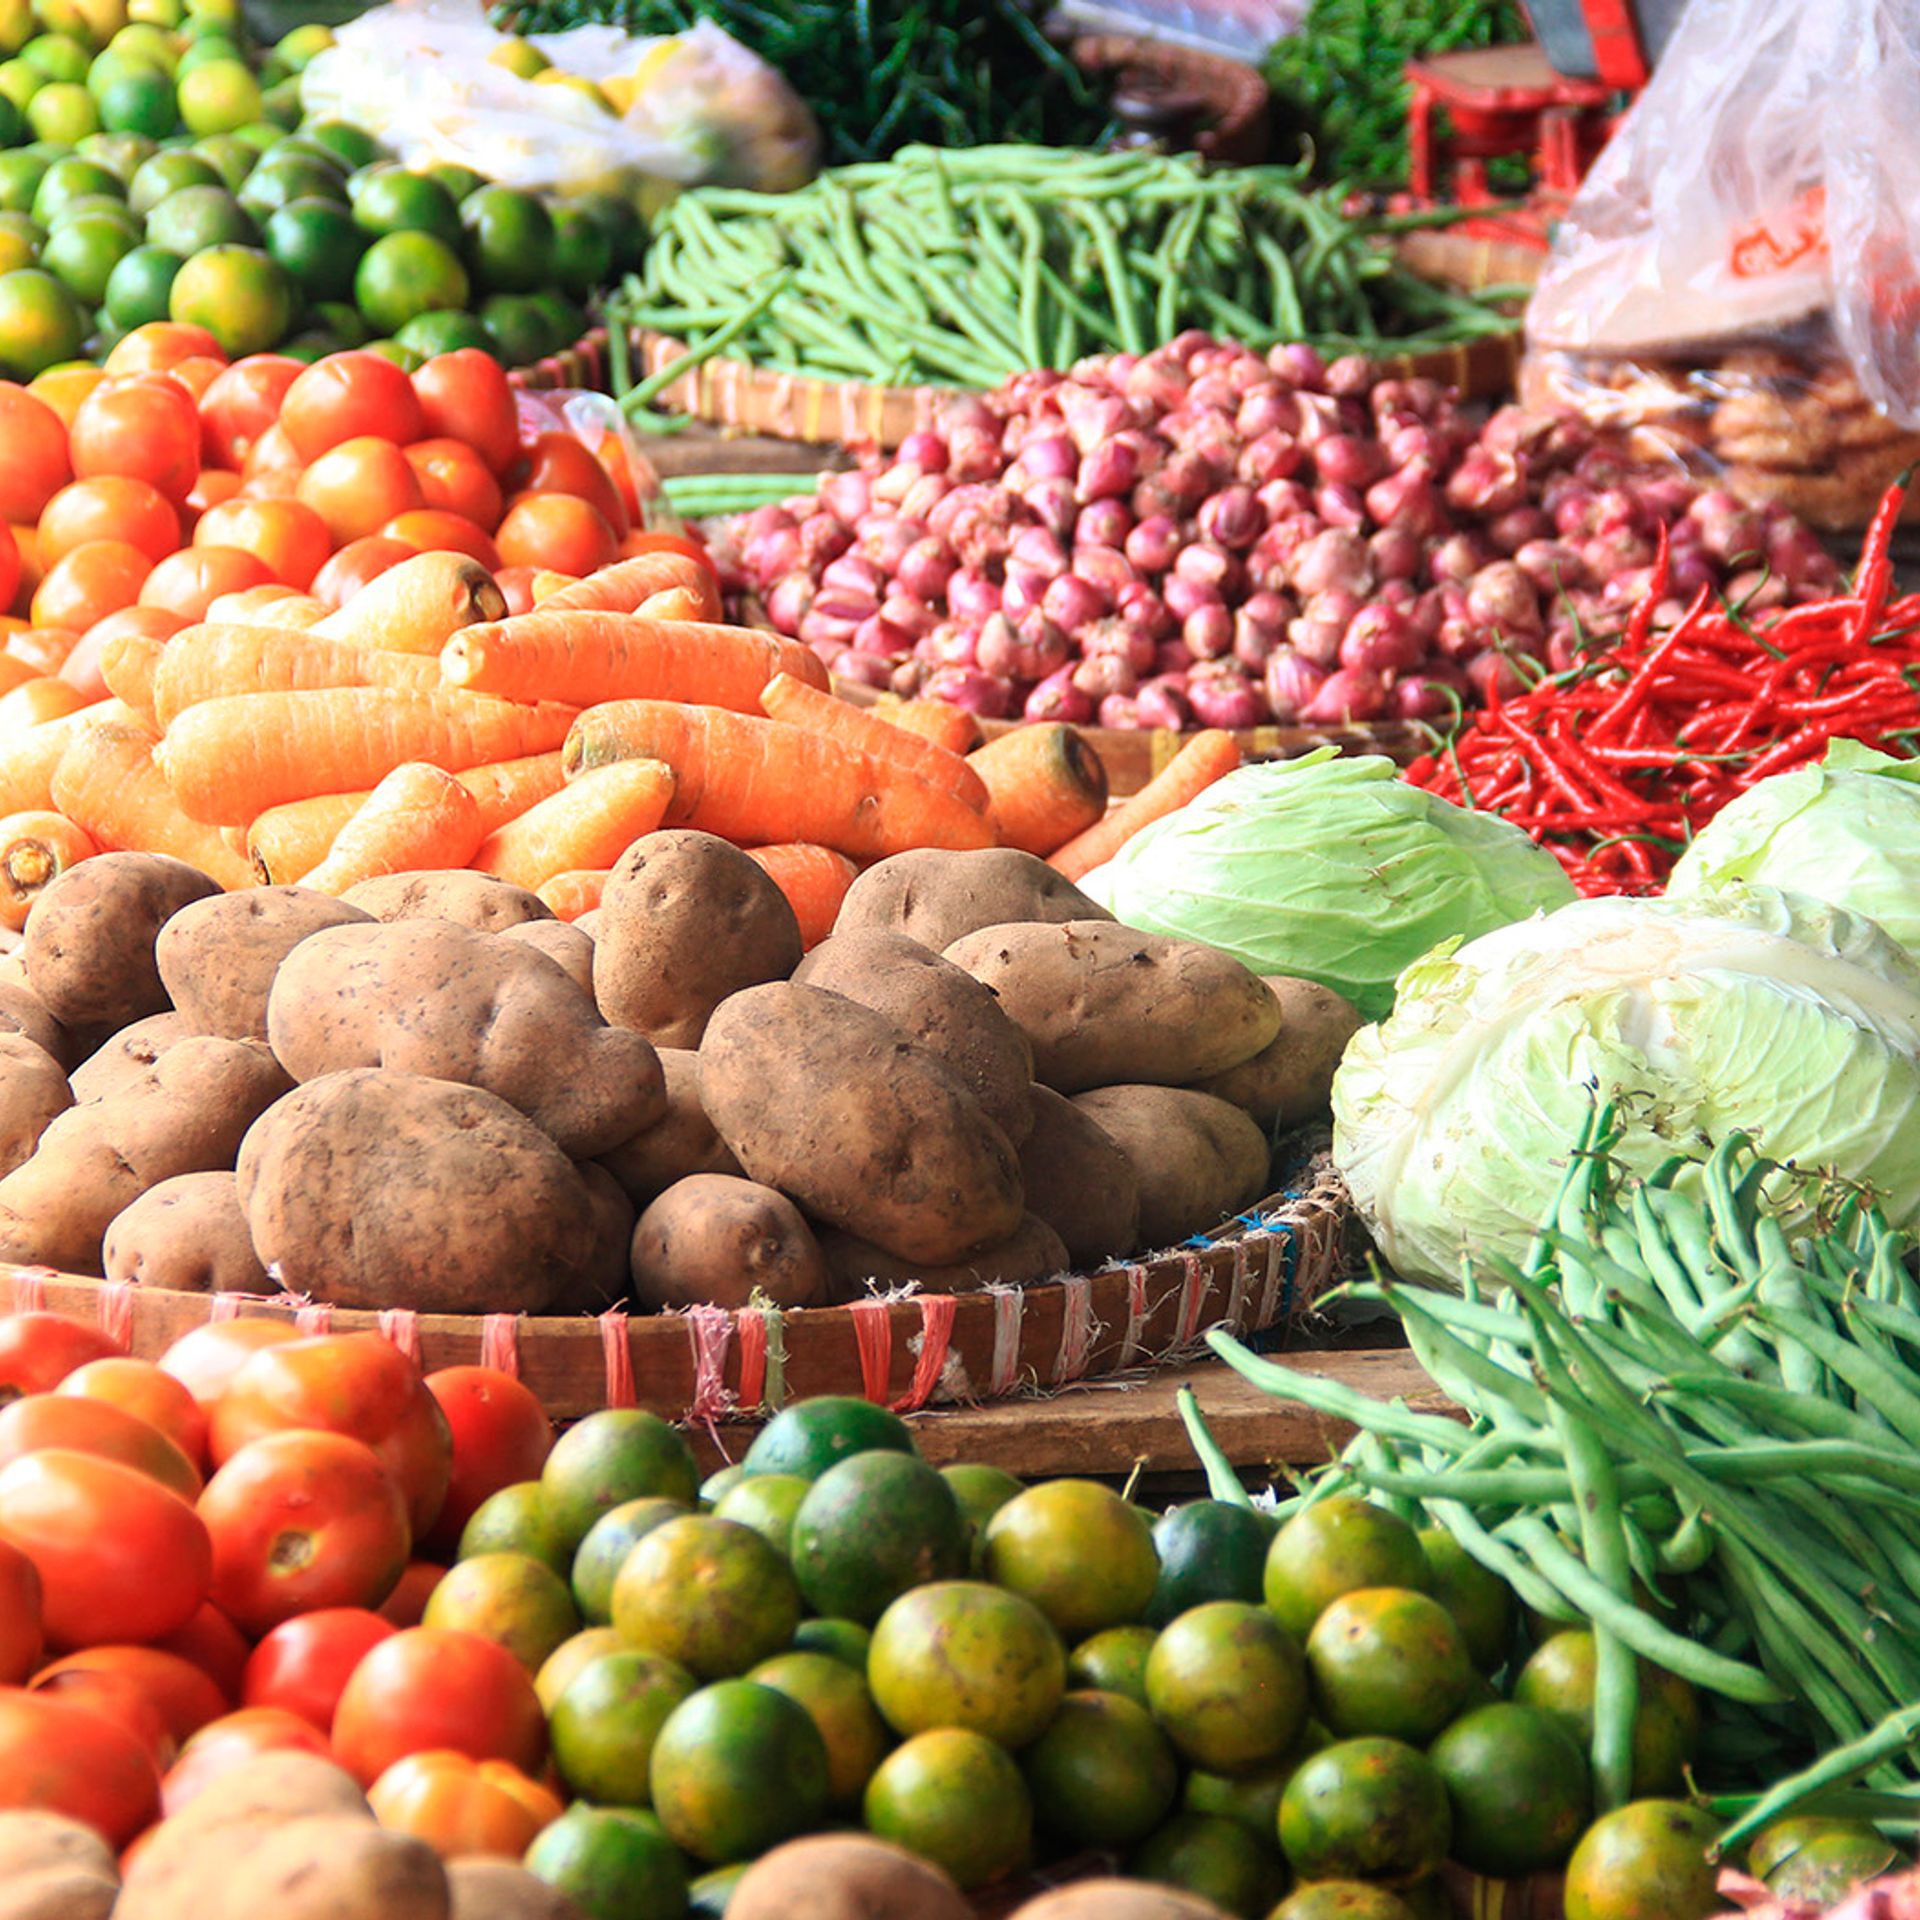 Image of fresh fruit and vegetable produce in a retail store